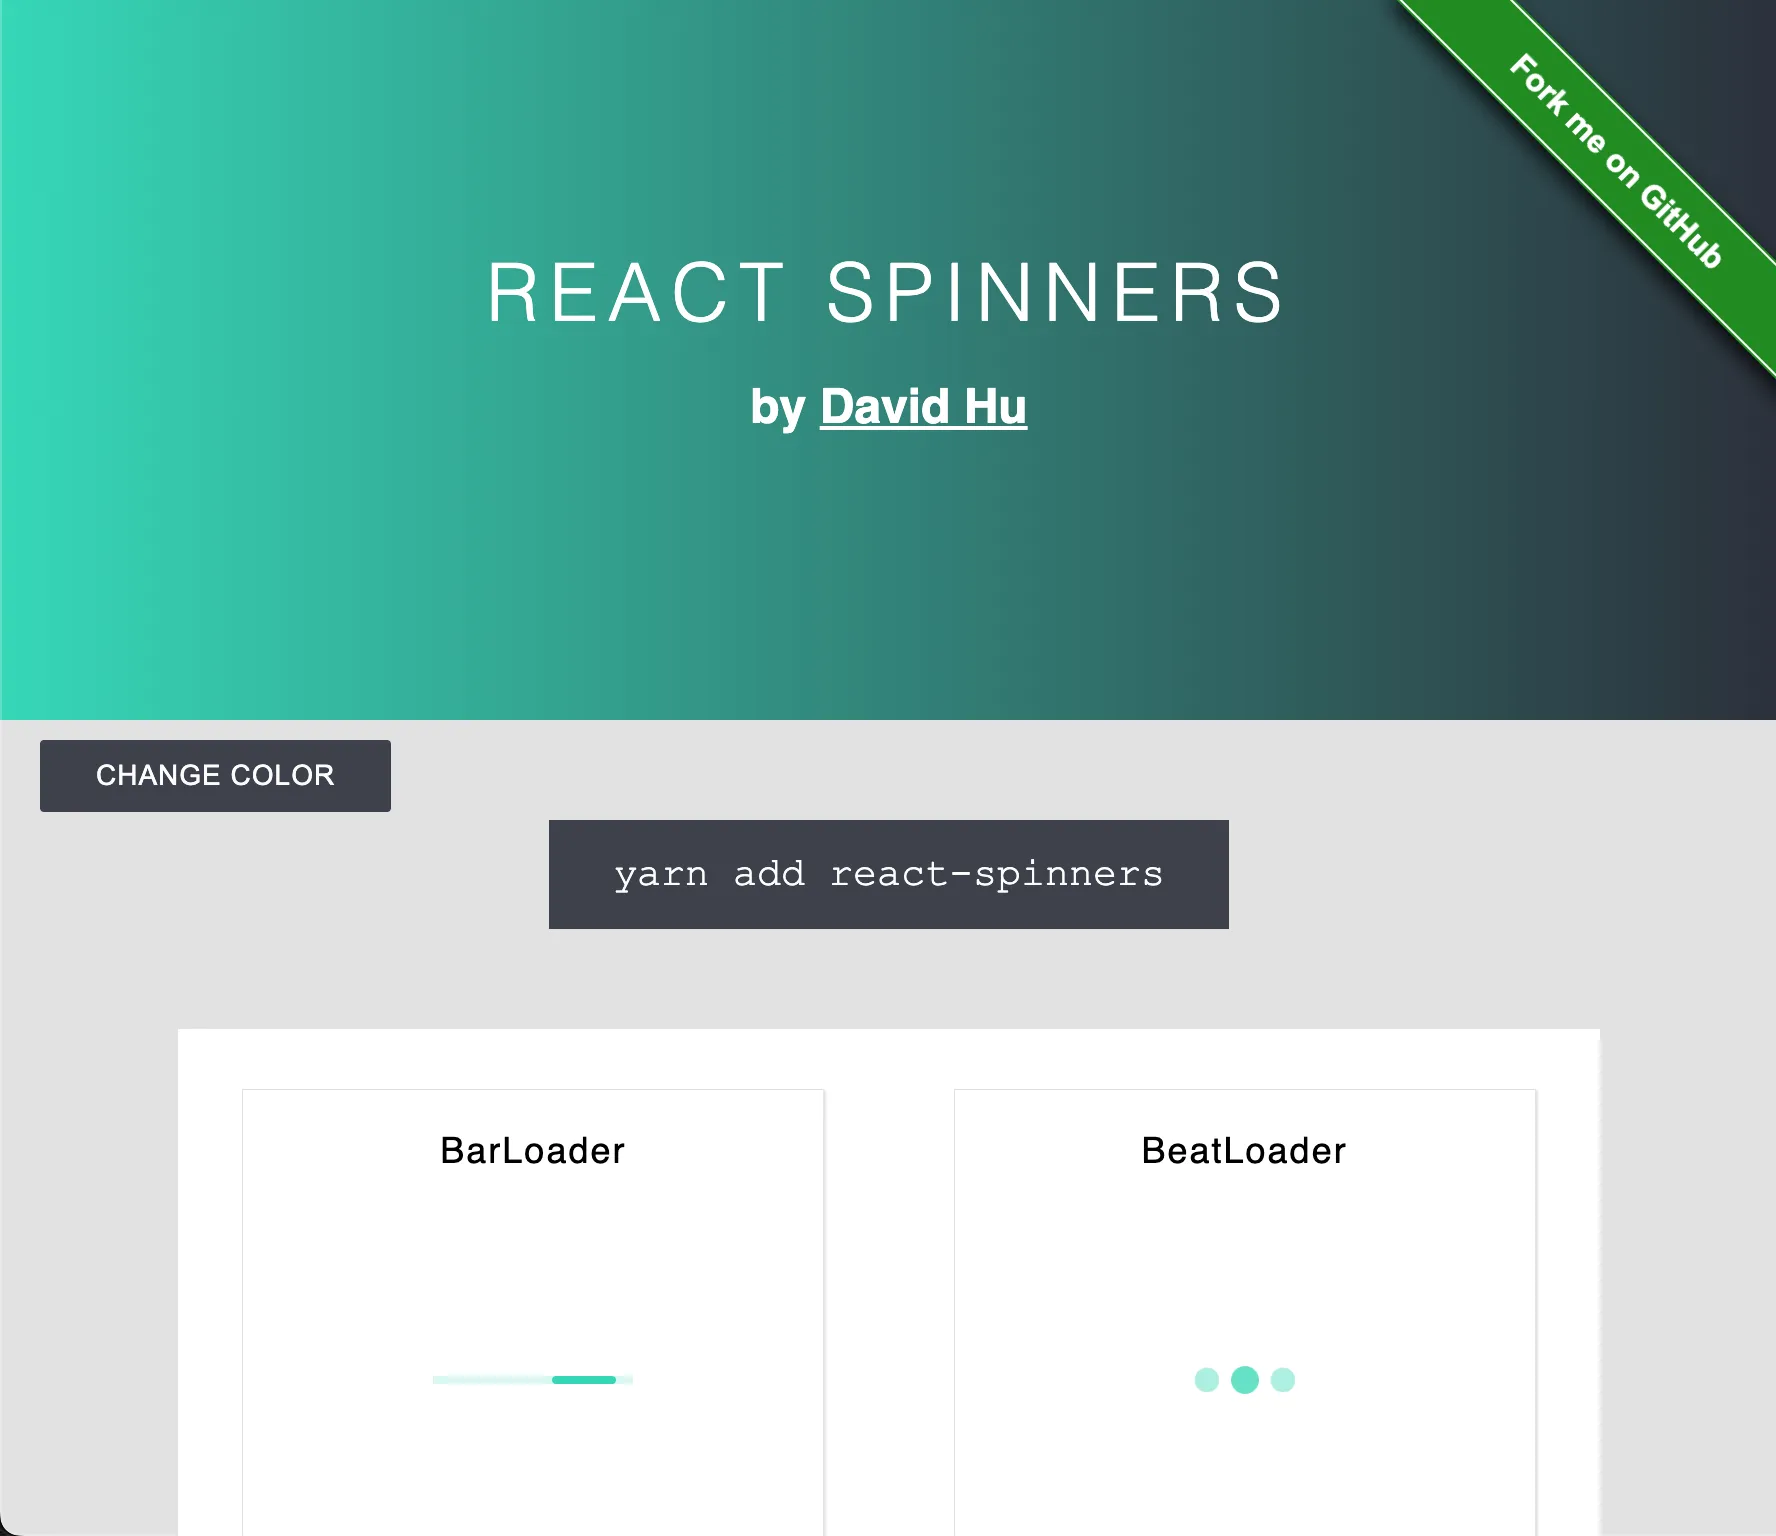 React spinners